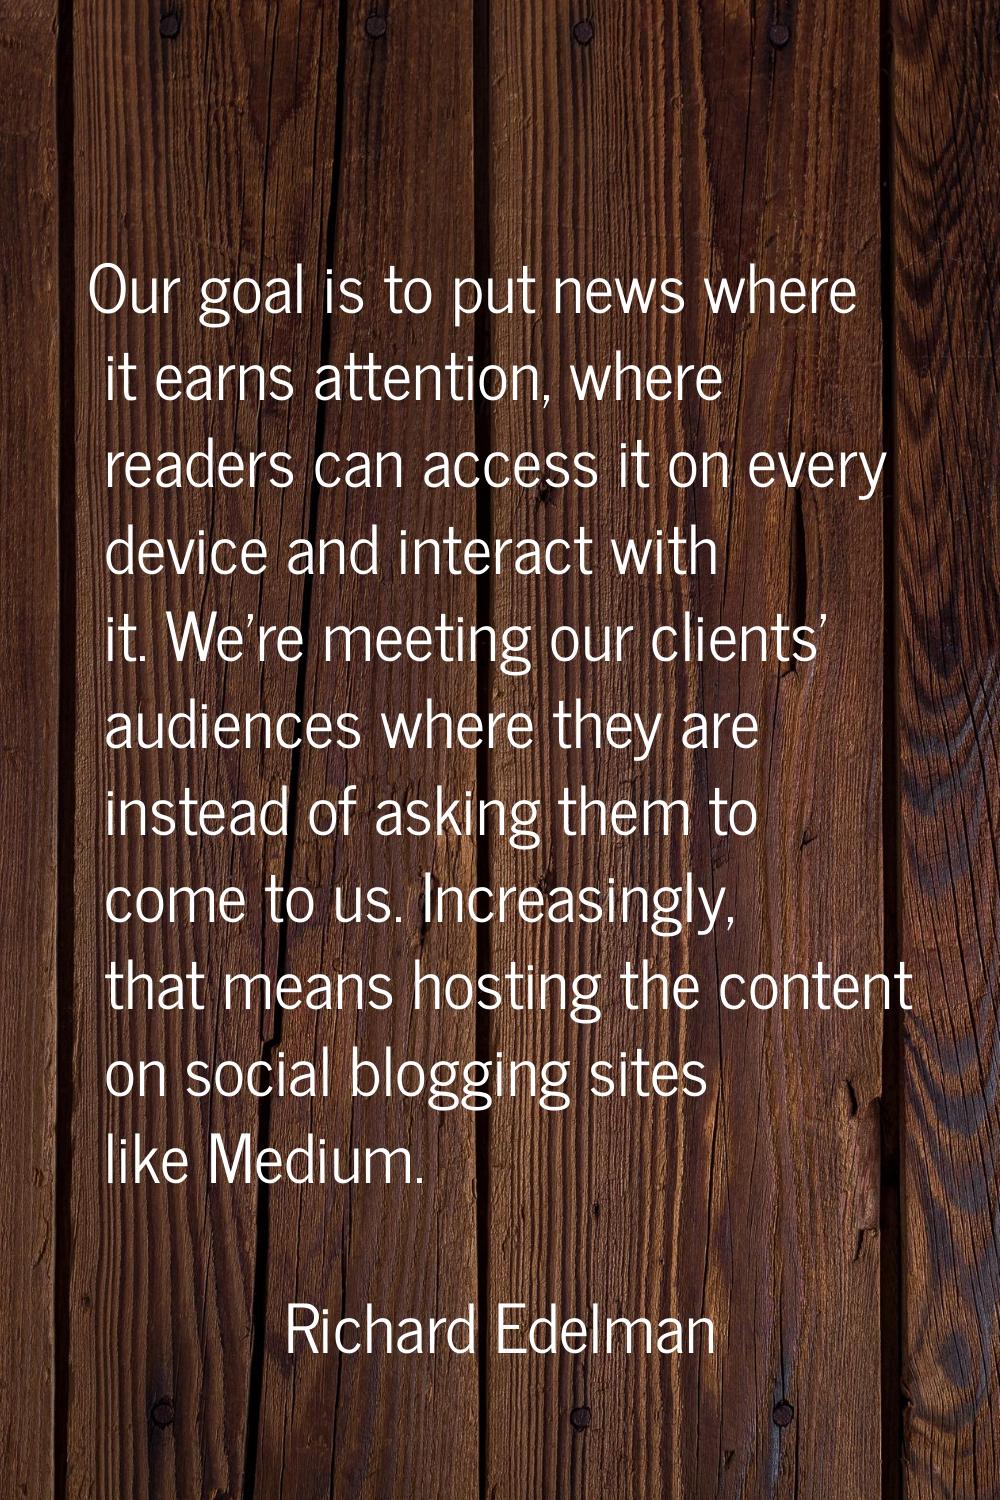 Our goal is to put news where it earns attention, where readers can access it on every device and i